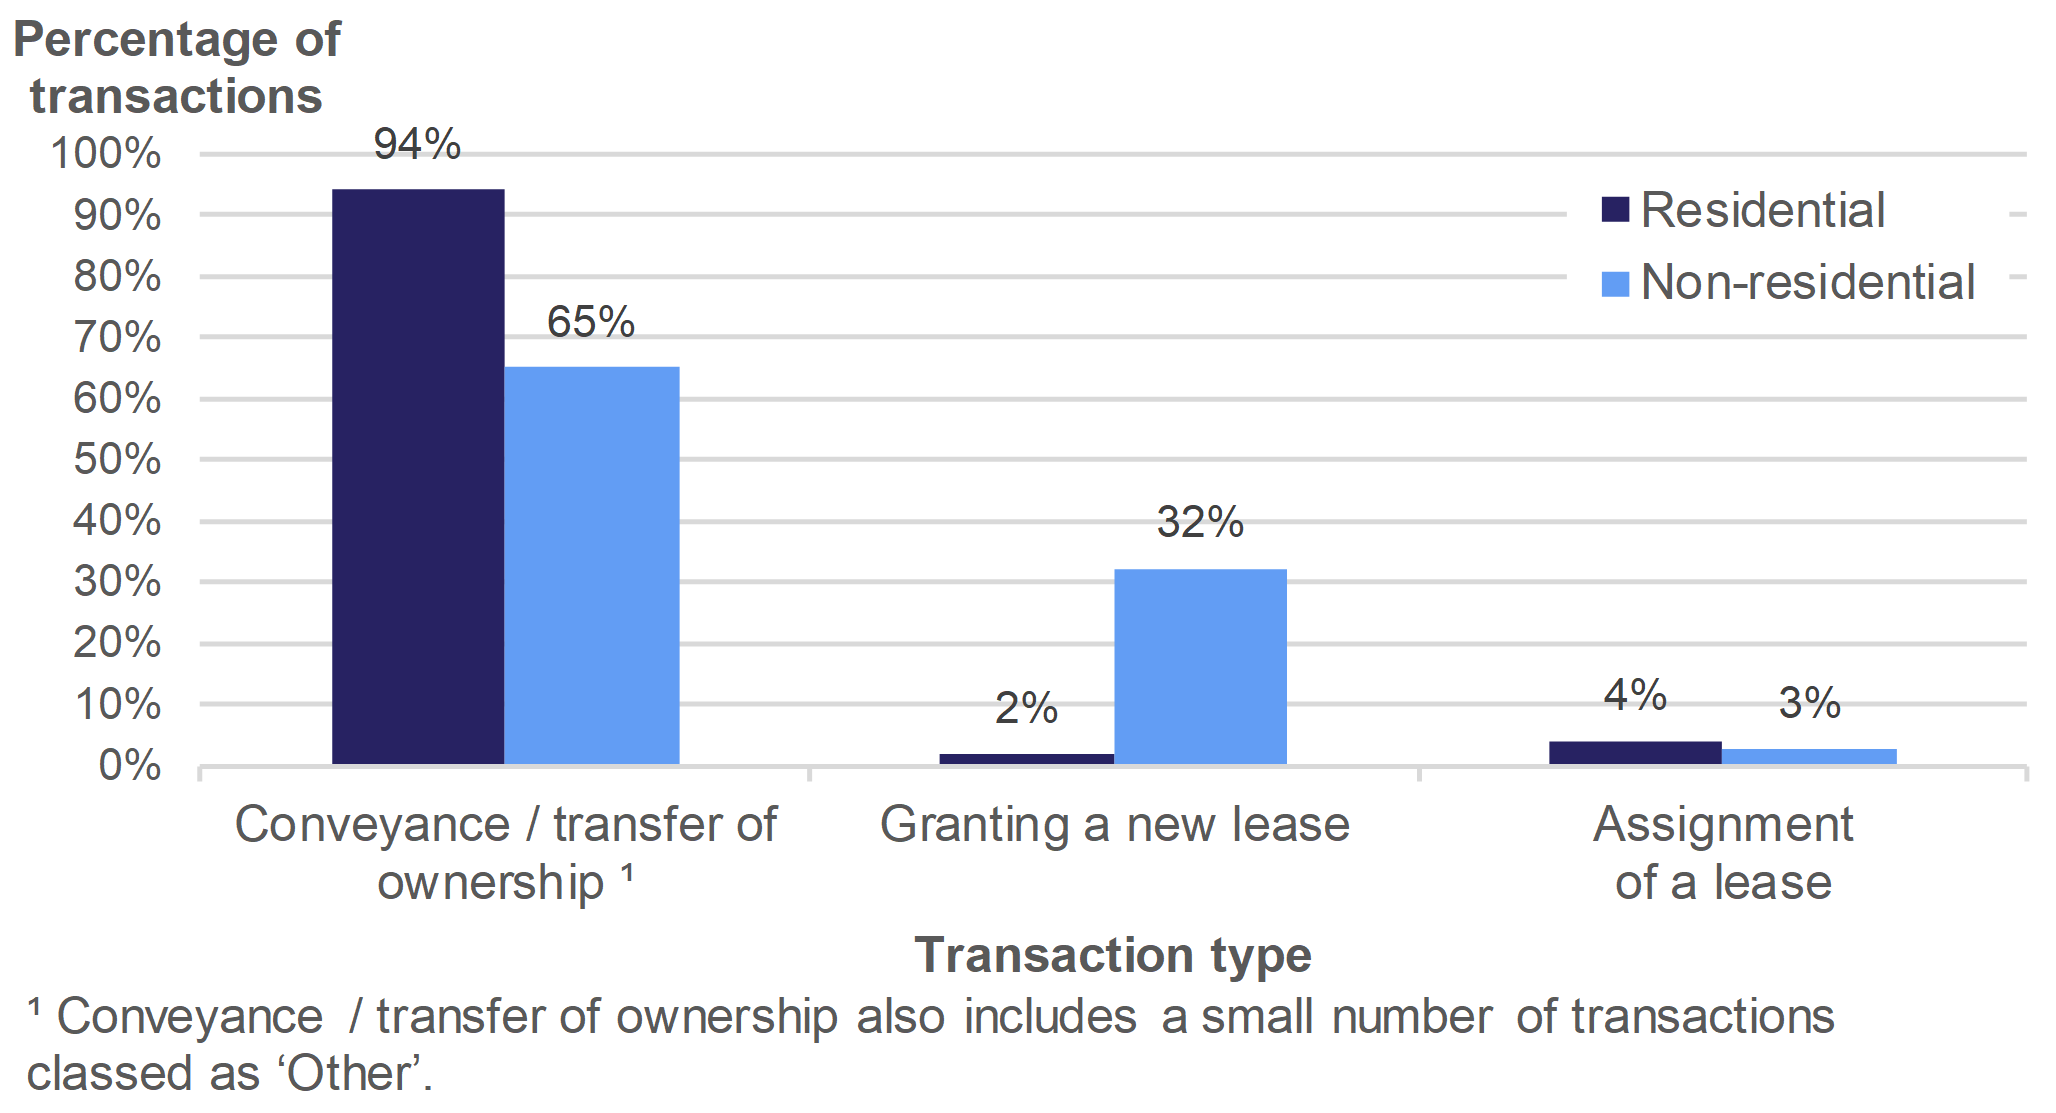 Figure 2.6 shows the percentage of transactions involving conveyance / transfer of ownership, granting of a new lease or assignment of a lease, for July to September 2019. Separate percentages are given for residential and non-residential transactions.